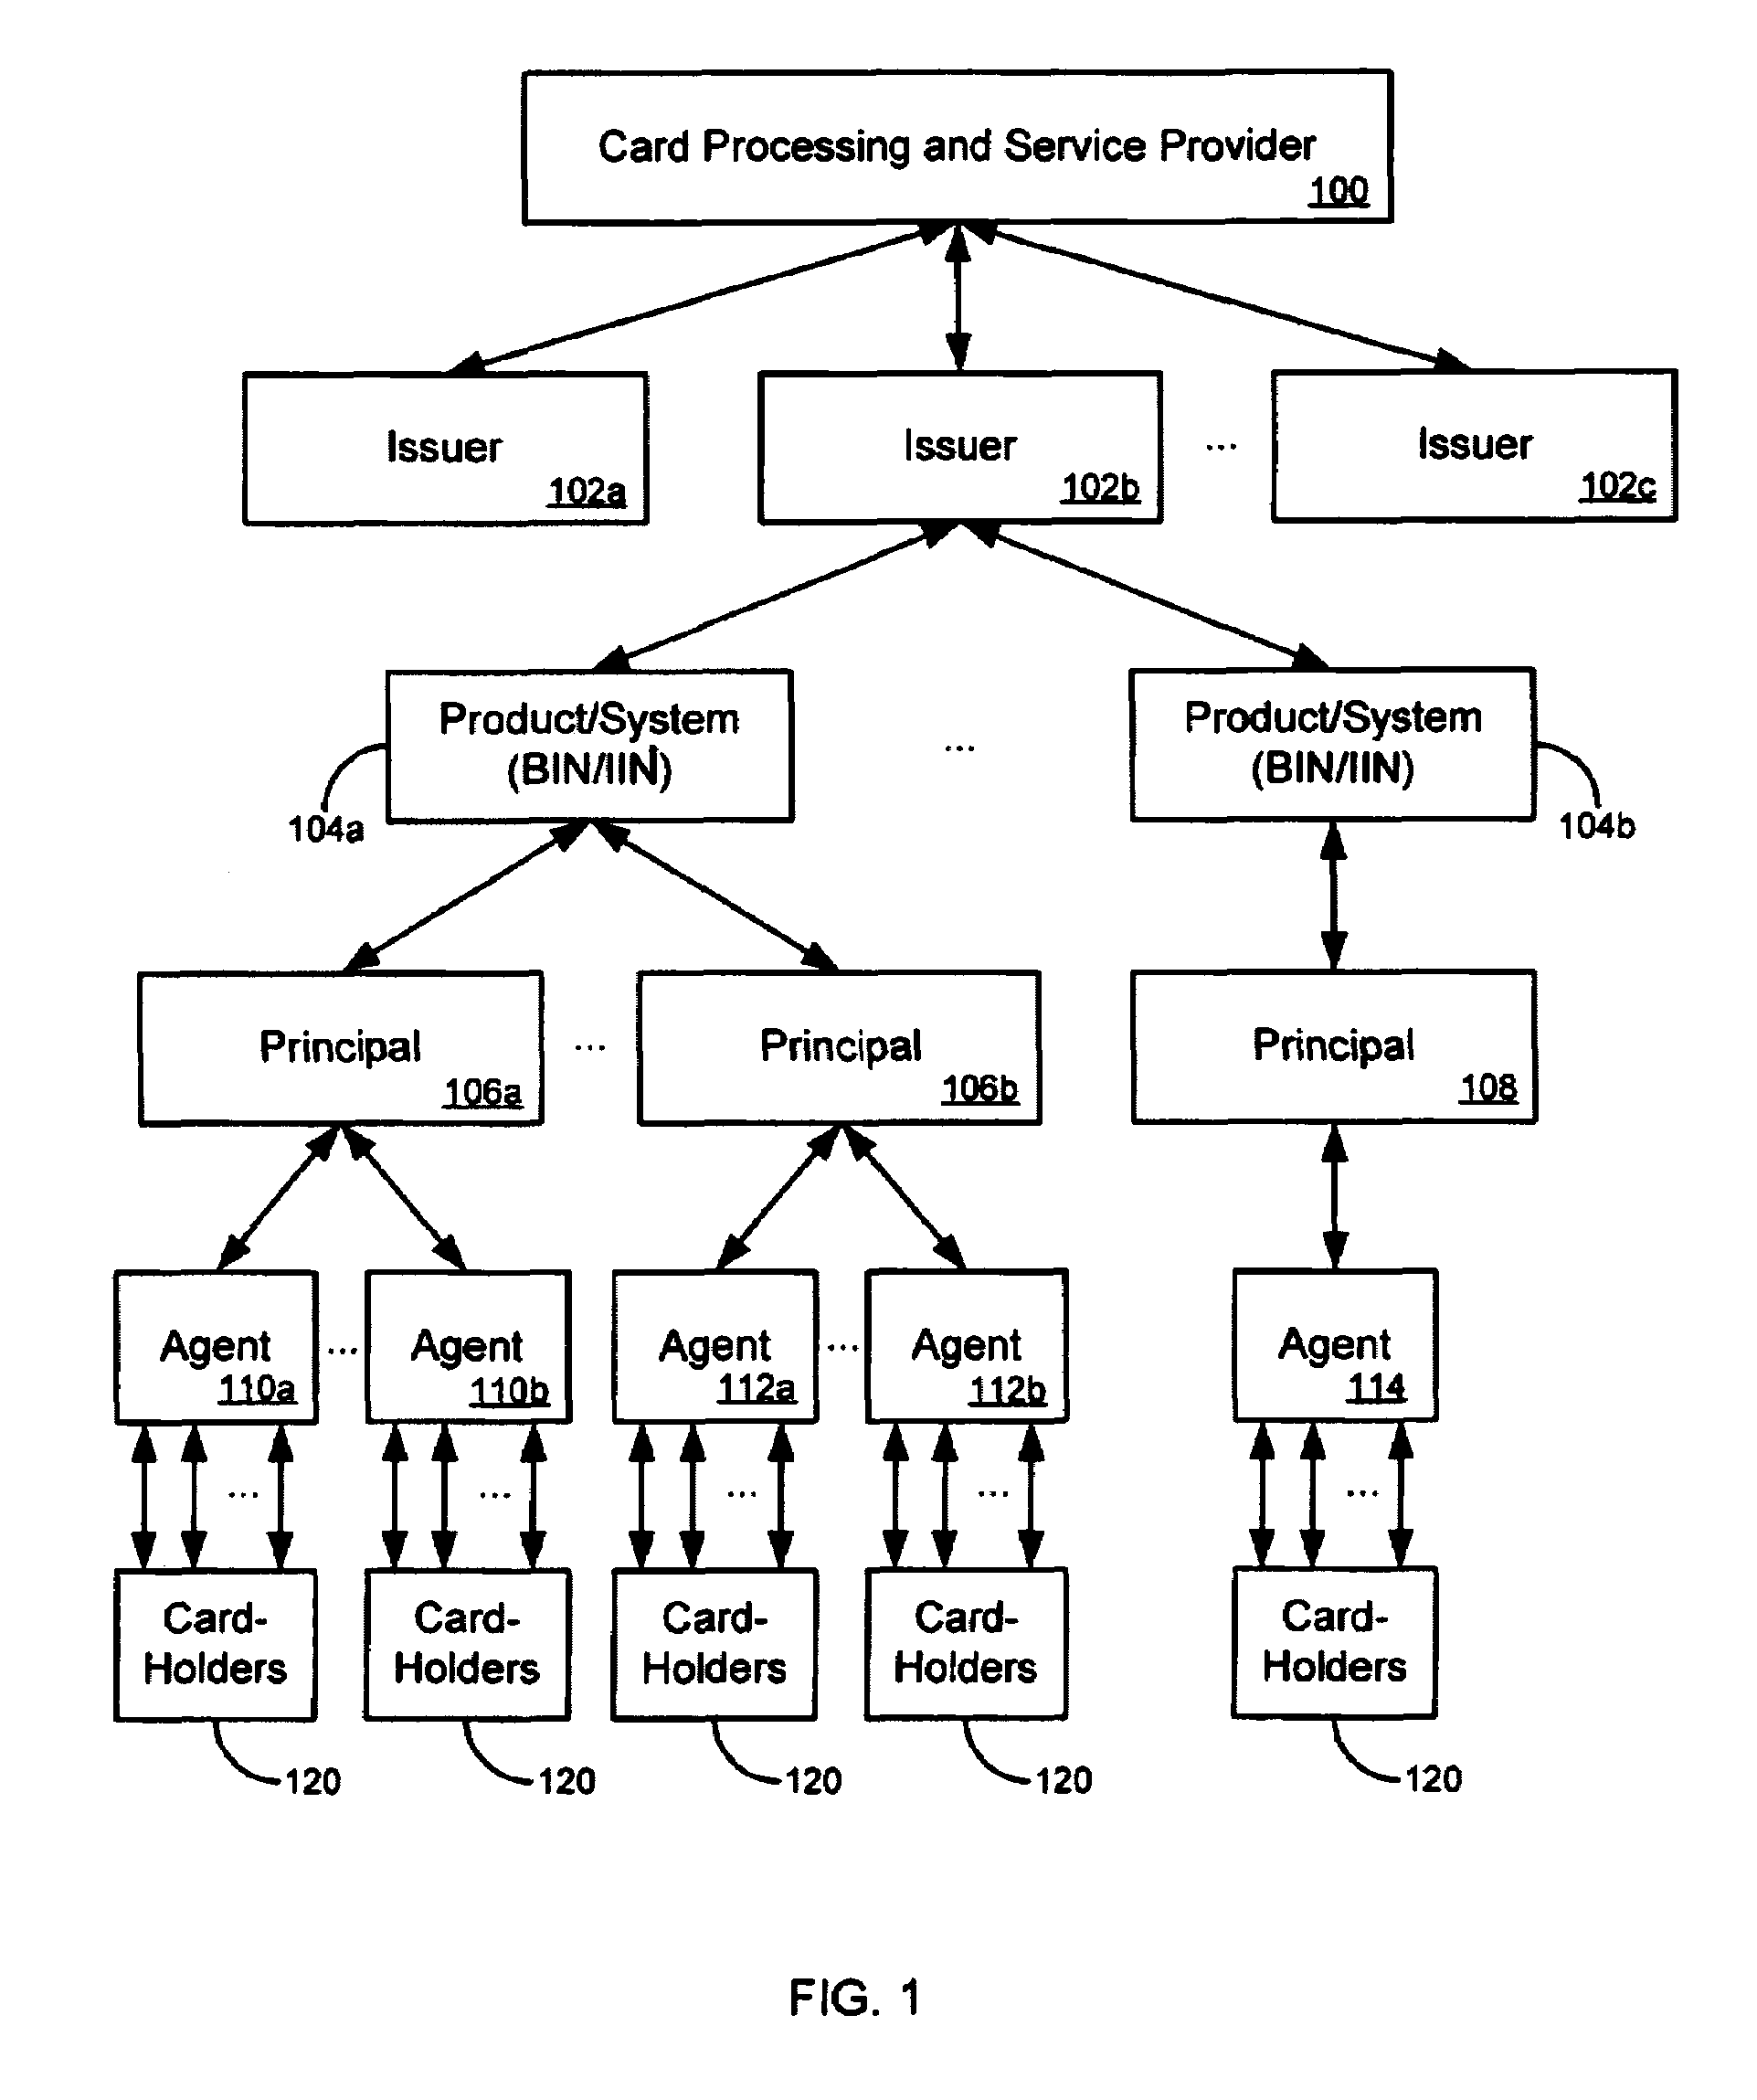 Method for linking accounts corresponding to different products together to create a group